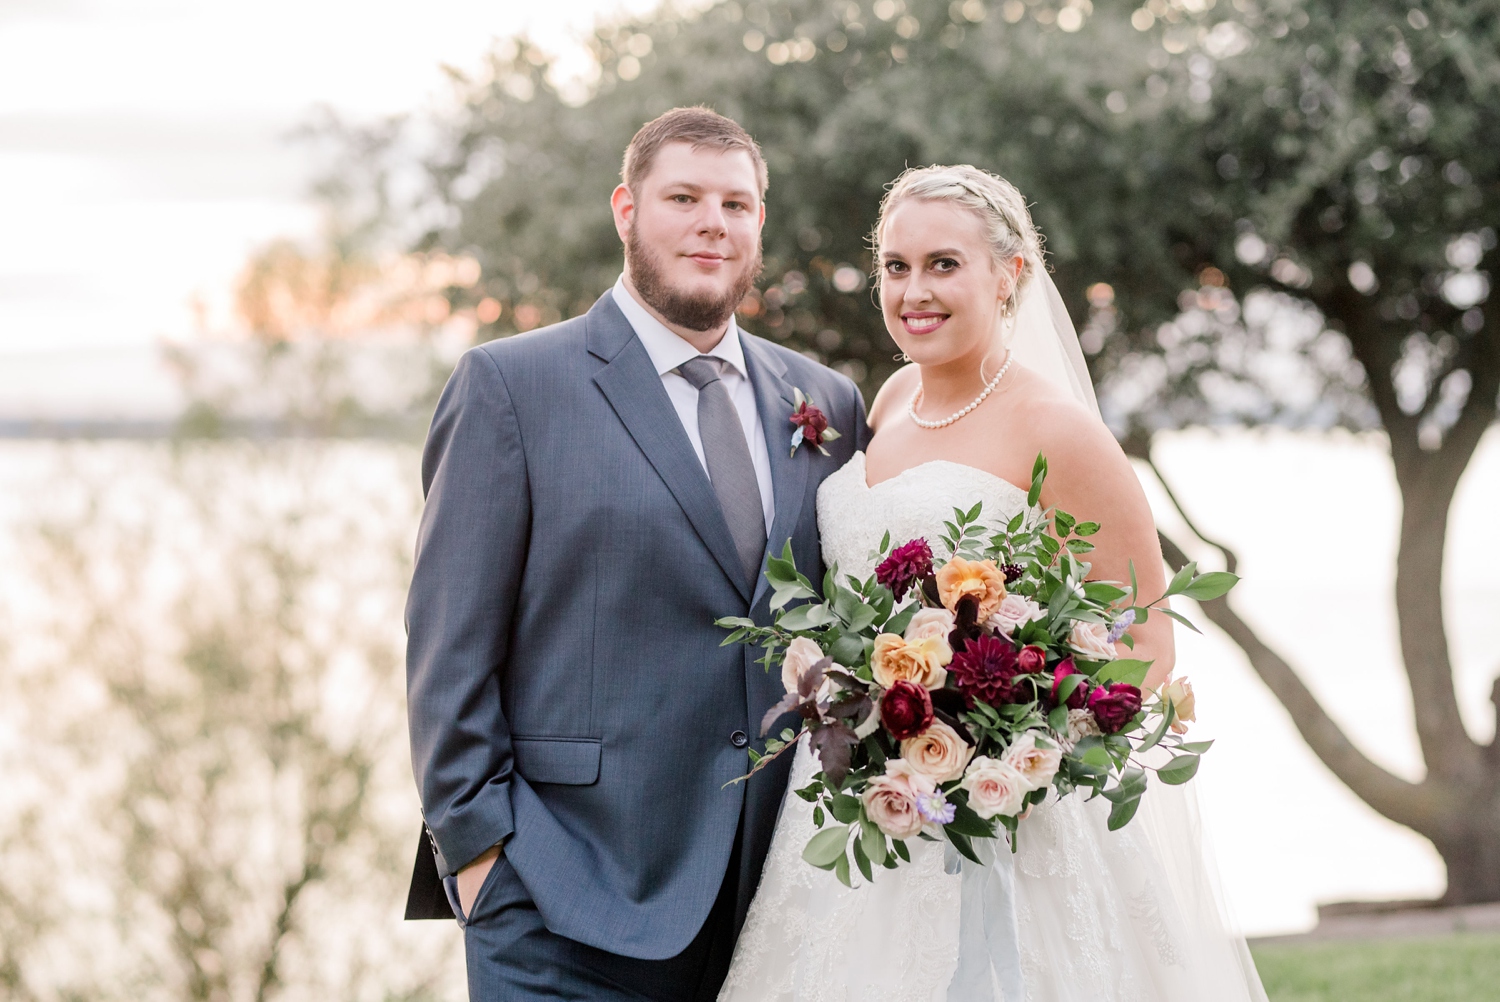 Wedding Photos by the Lake at Sunset in Fort Worth